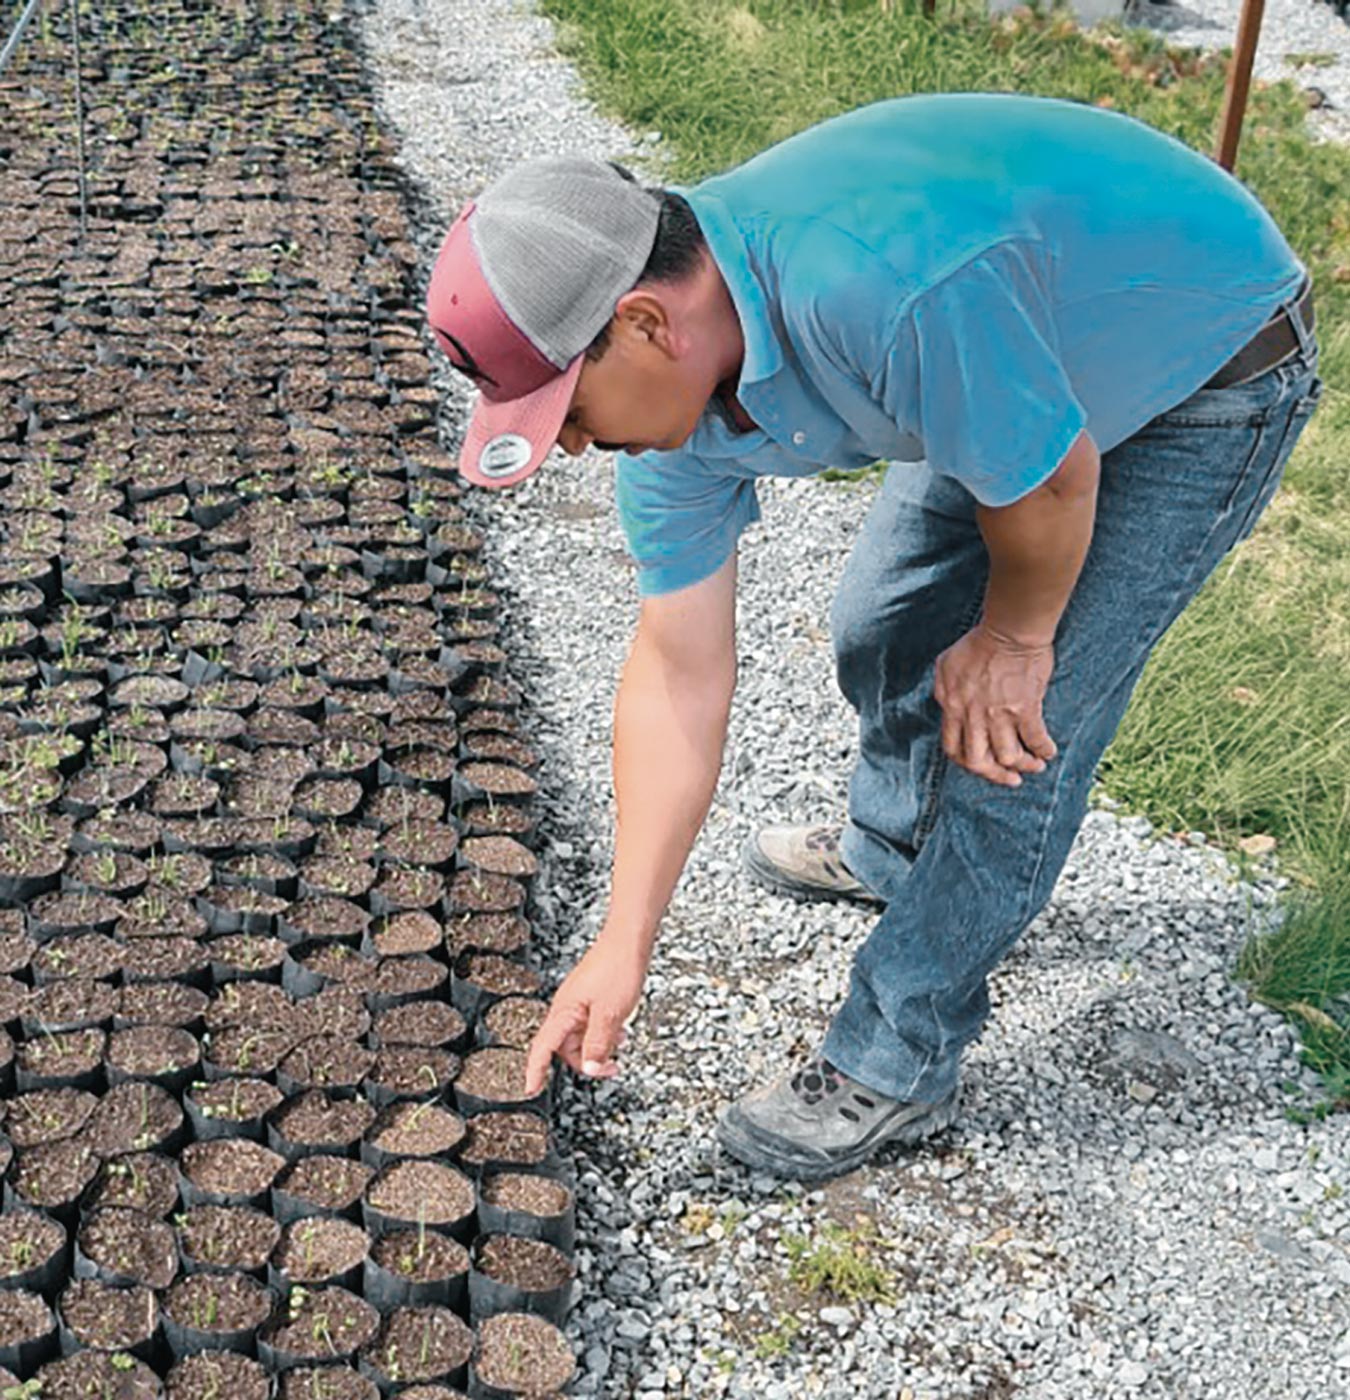 a rural community member checks the community’s agave seedlings in northeast Mexico